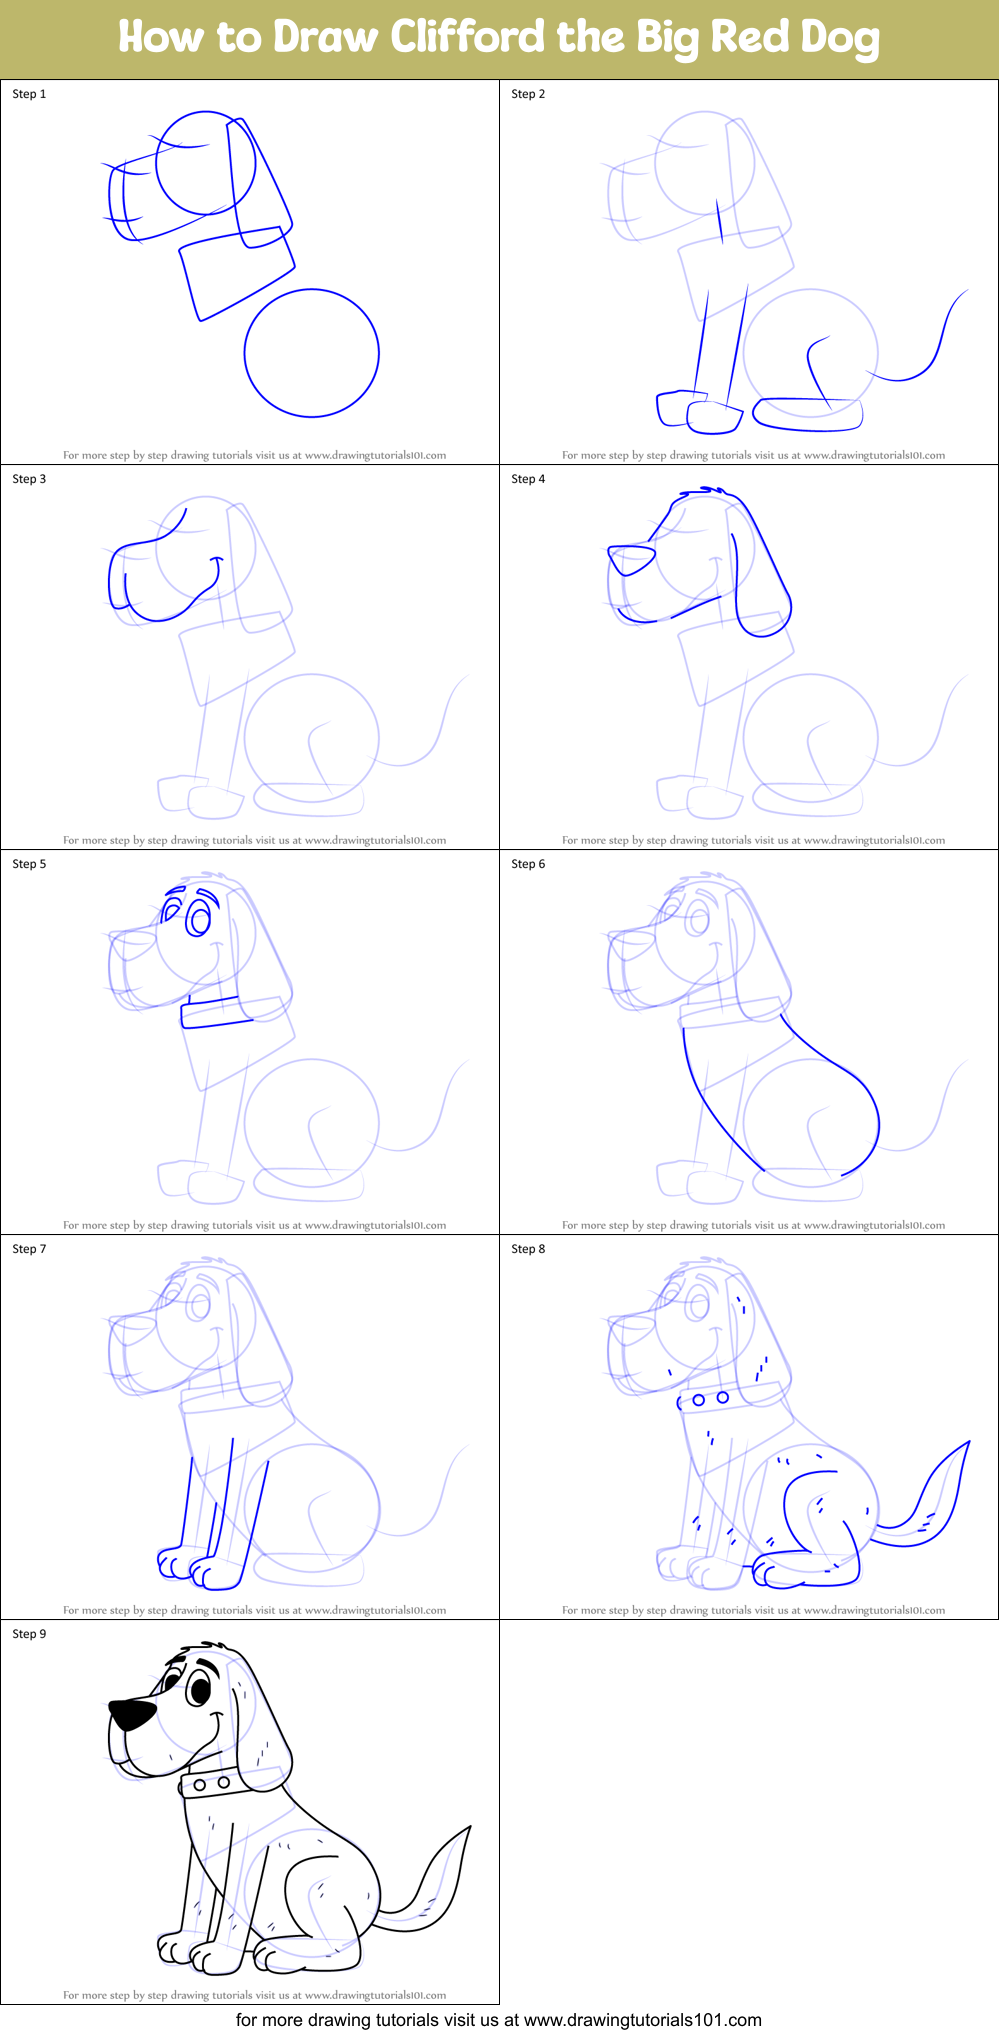 How to Draw Clifford the Big Red Dog (Clifford the Big Red Dog) Step by ...